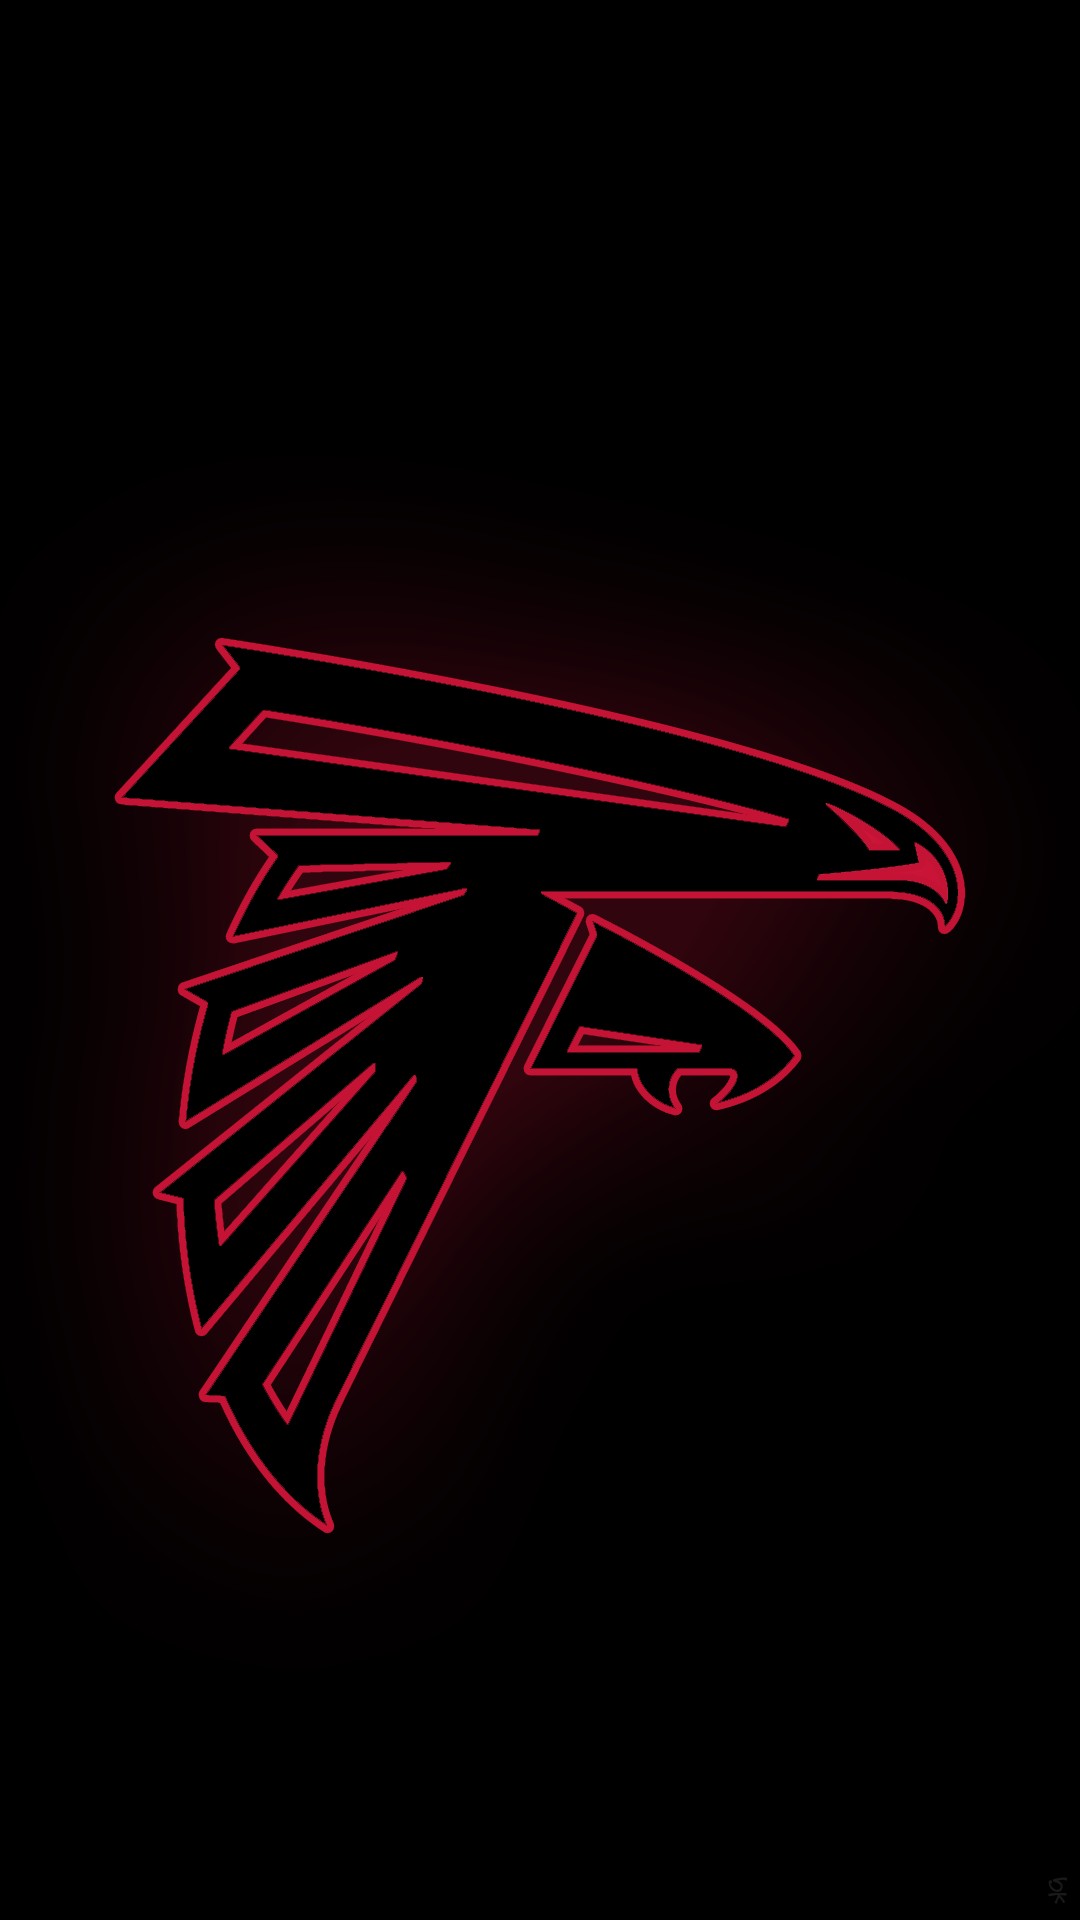 Screensaver iPhone Atlanta Falcons With high-resolution 1080X1920 pixel. Donwload and set as wallpaper for your iPhone X, iPhone XS home screen backgrounds, XS Max, XR, iPhone8 lock screen wallpaper, iPhone 7, 6, SE, and other mobile devices